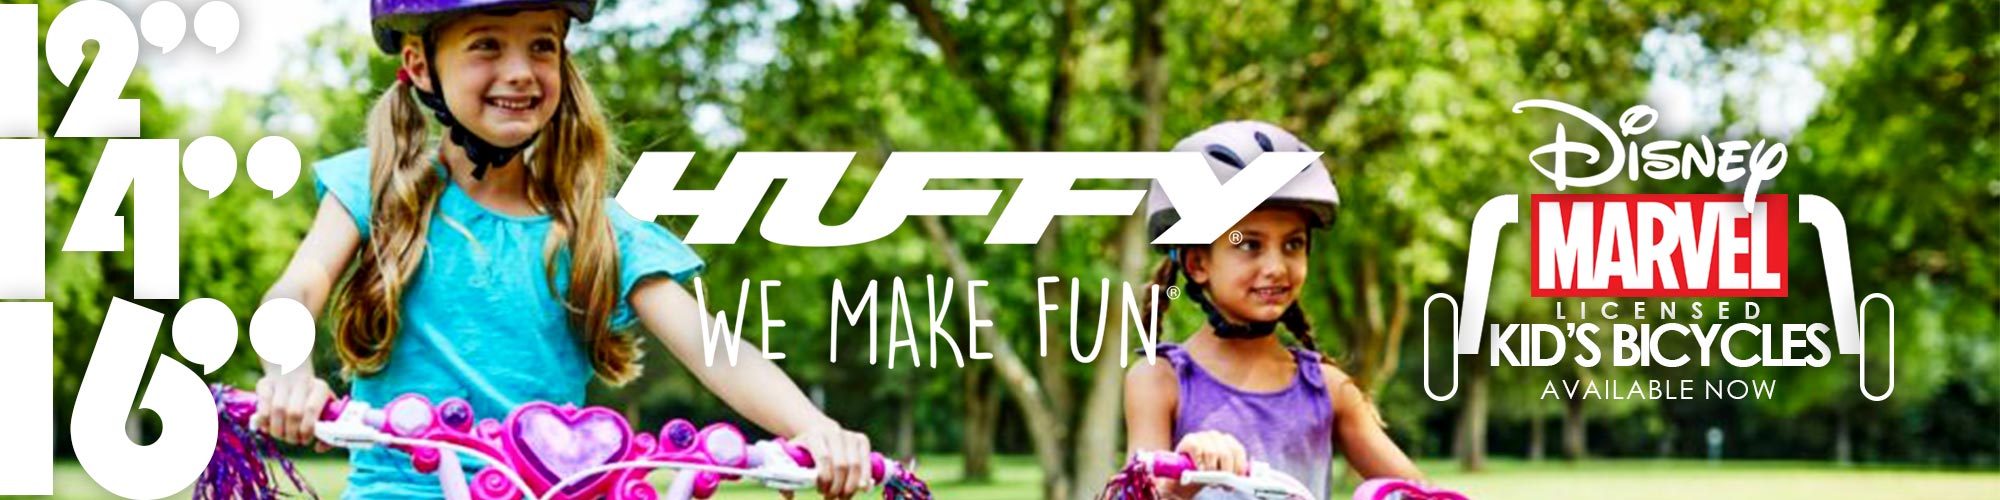 Huffy Licensed Disney & Marvel Kids Bicycles at E-Bikes Direct Outlet